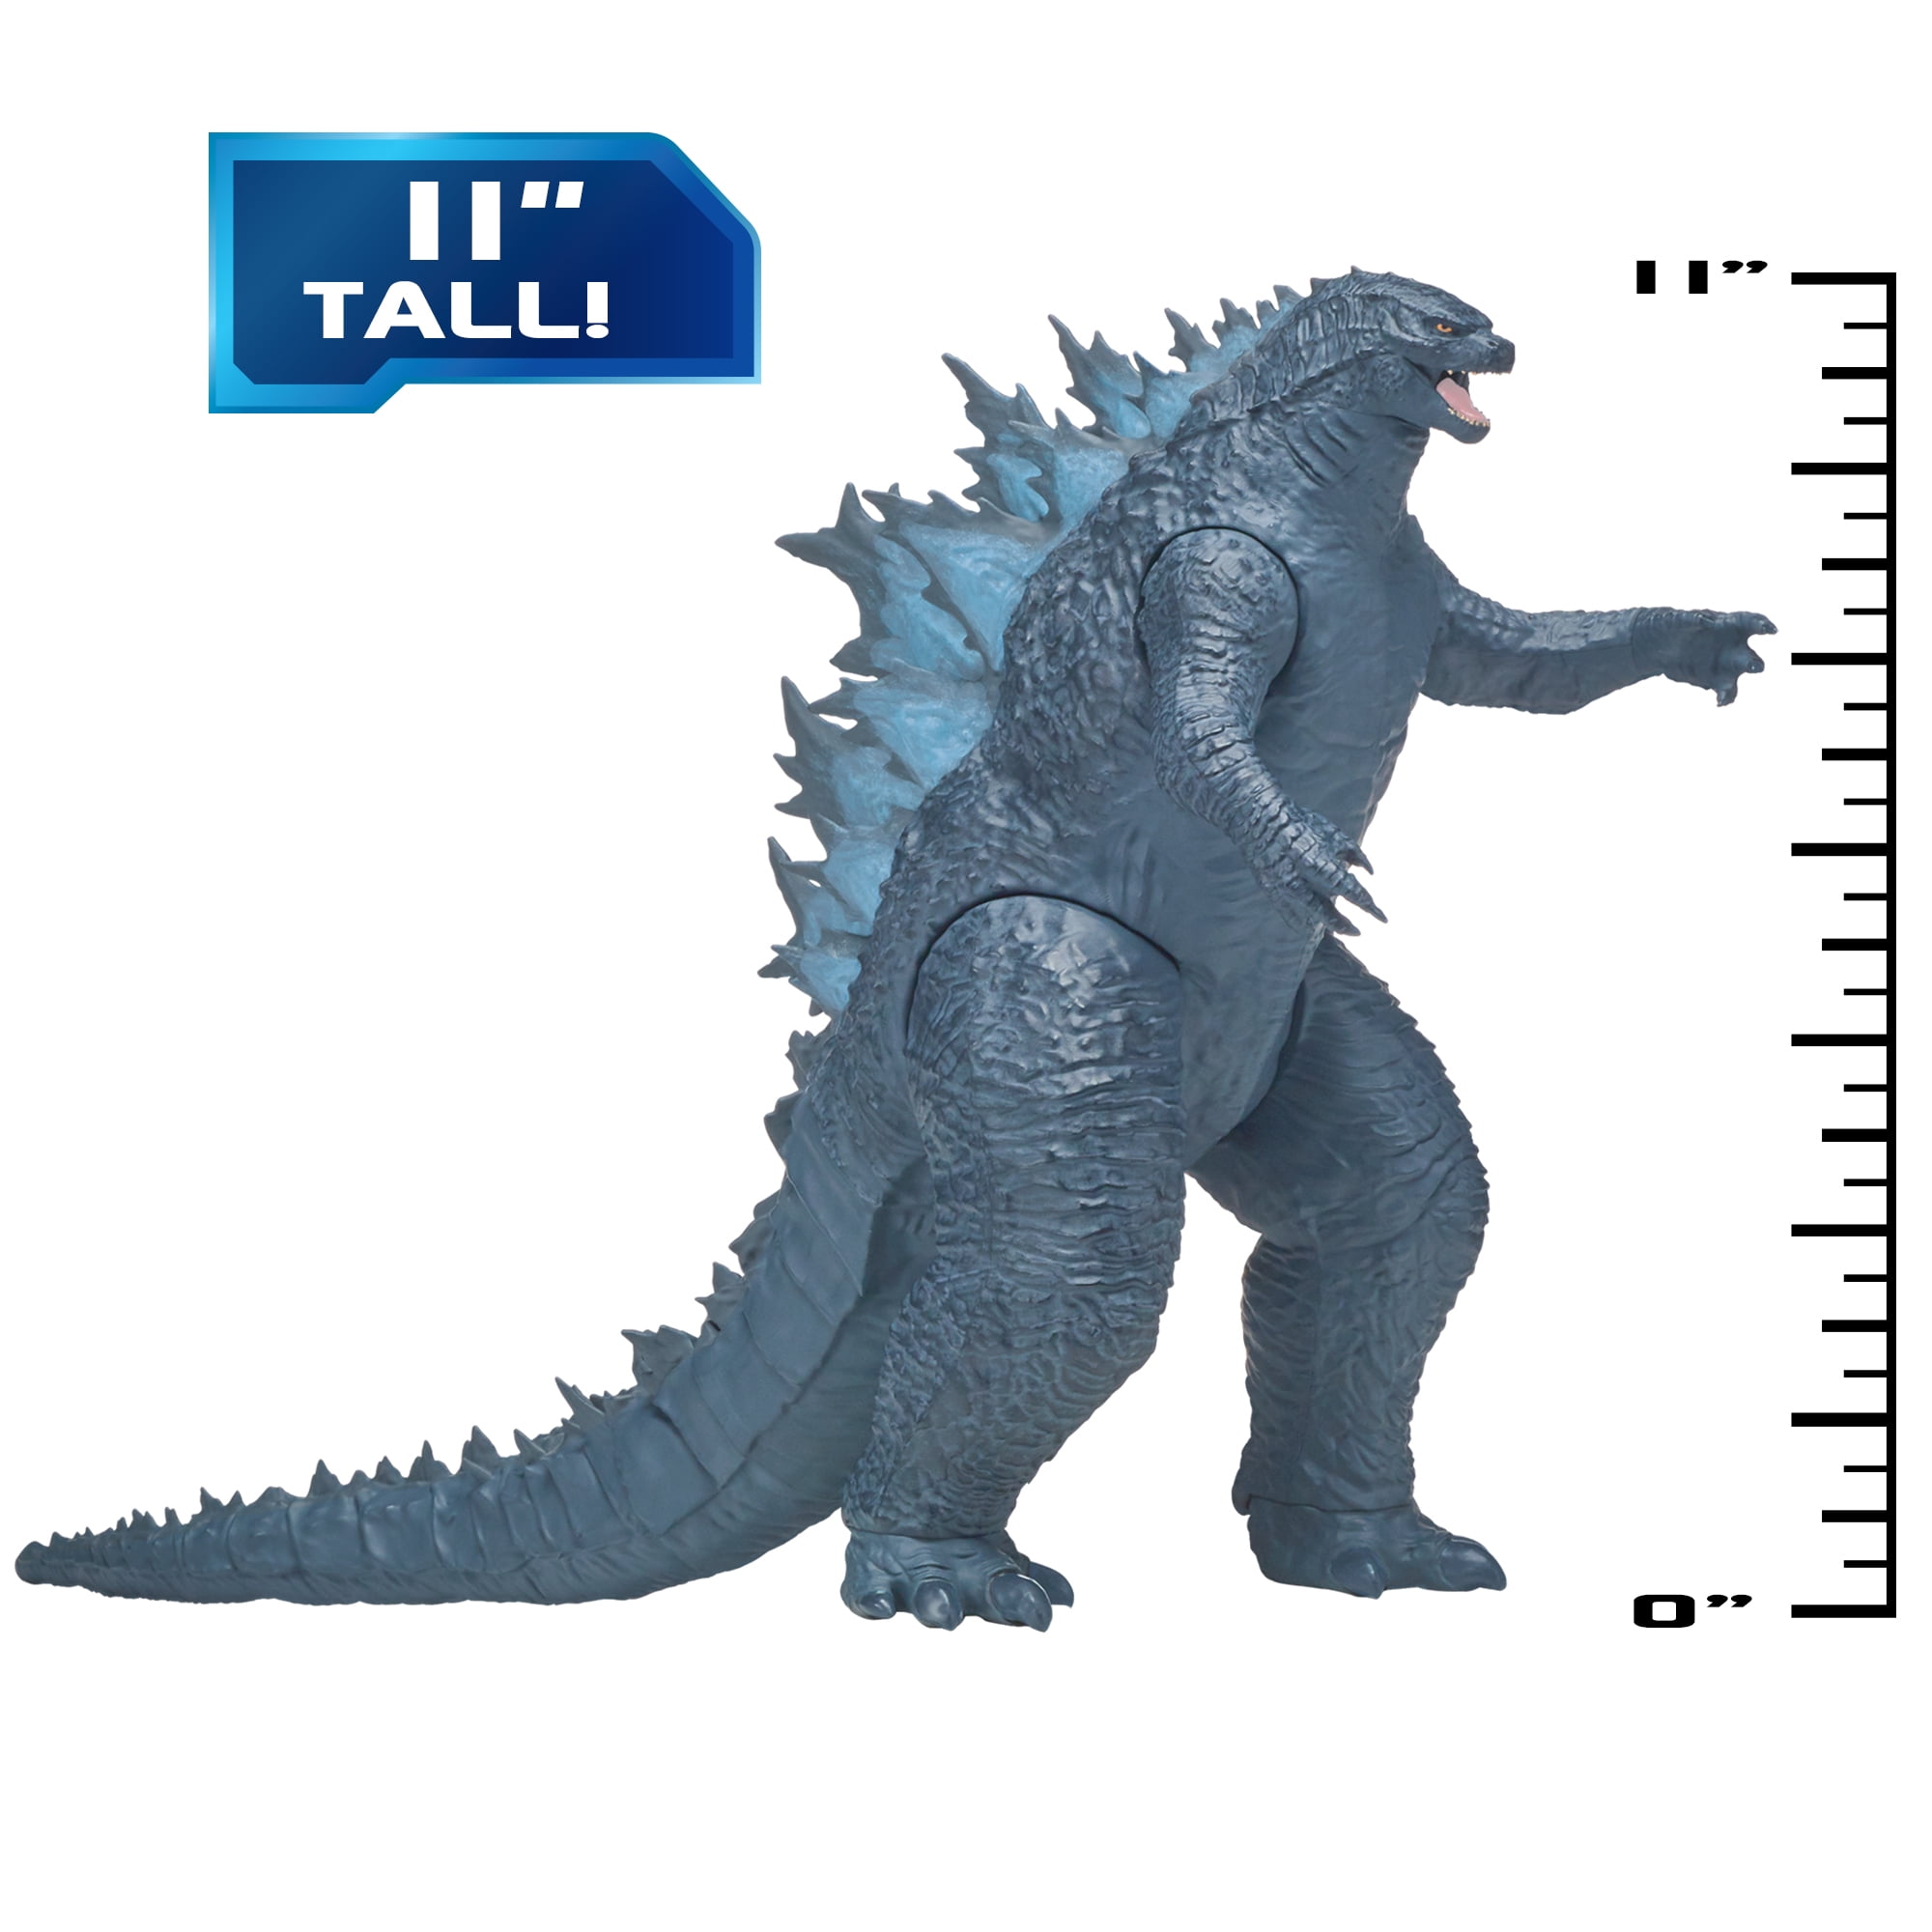 Free Ship! Godzilla Figures Set of 6 about 2 1/2 inches tall US Seller 